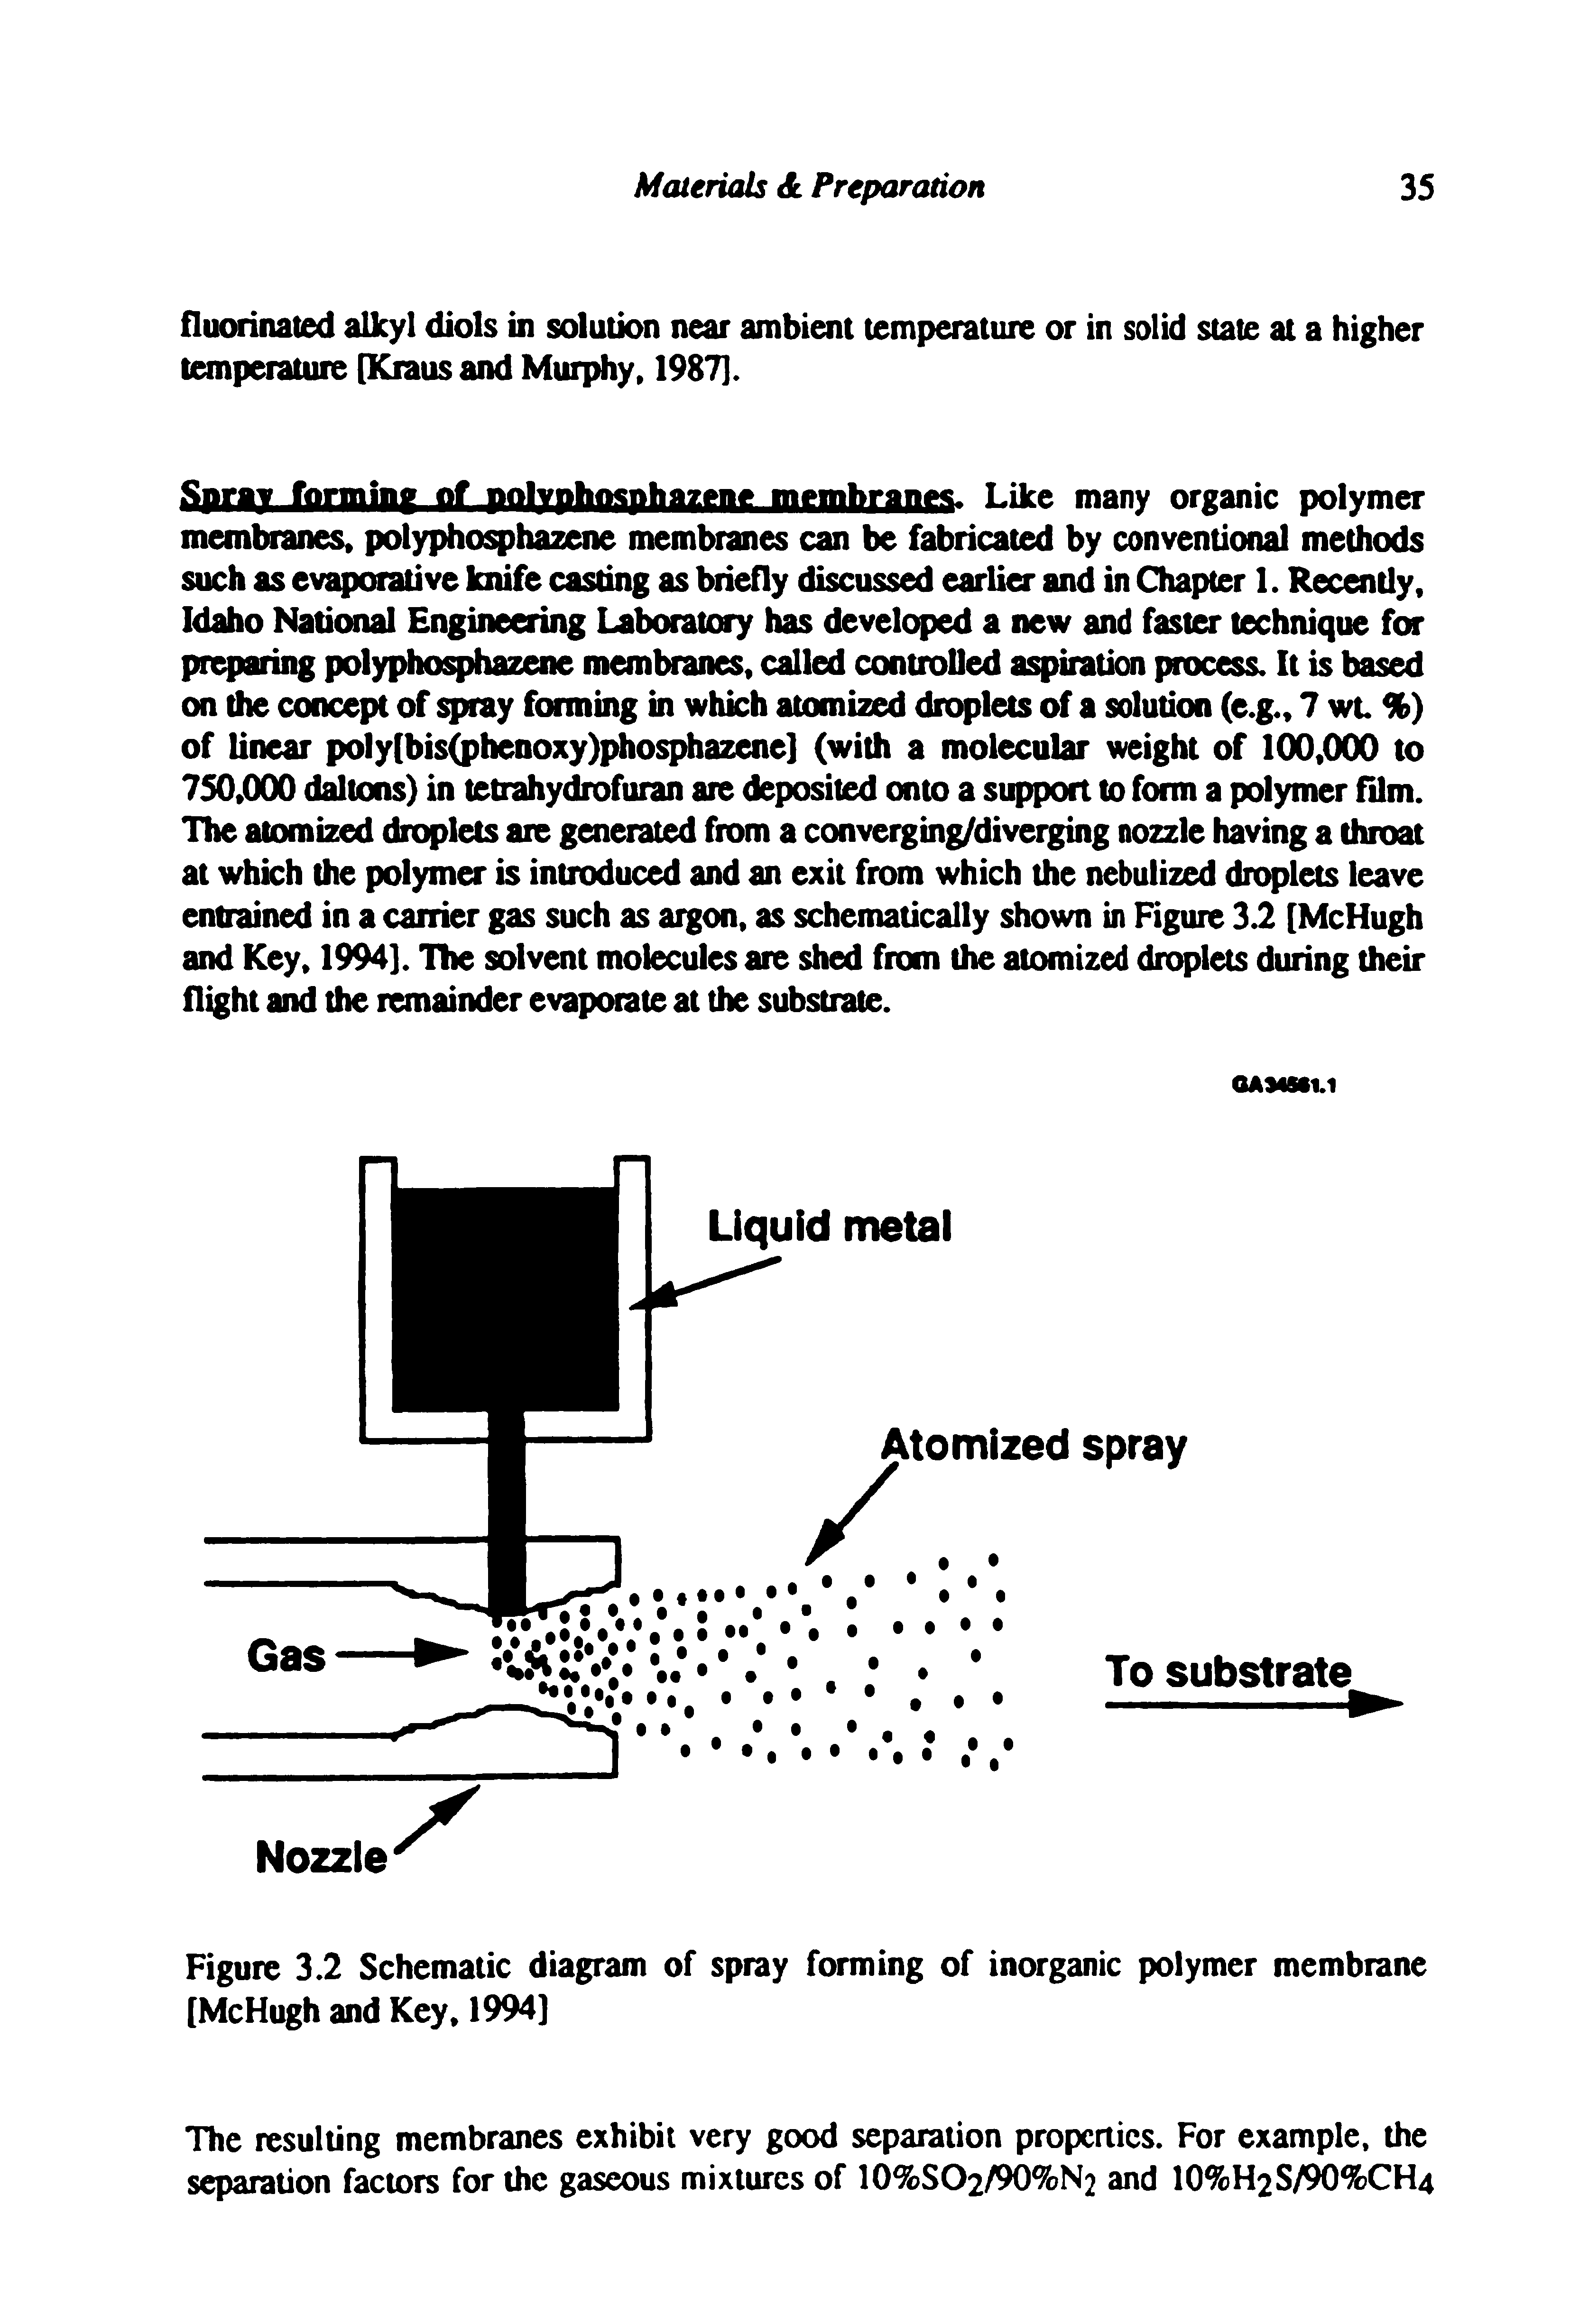 Figure 3.2 Schematic diagram of spray forming of inorganic polymer membrane [McHugh and Key, 1994]...